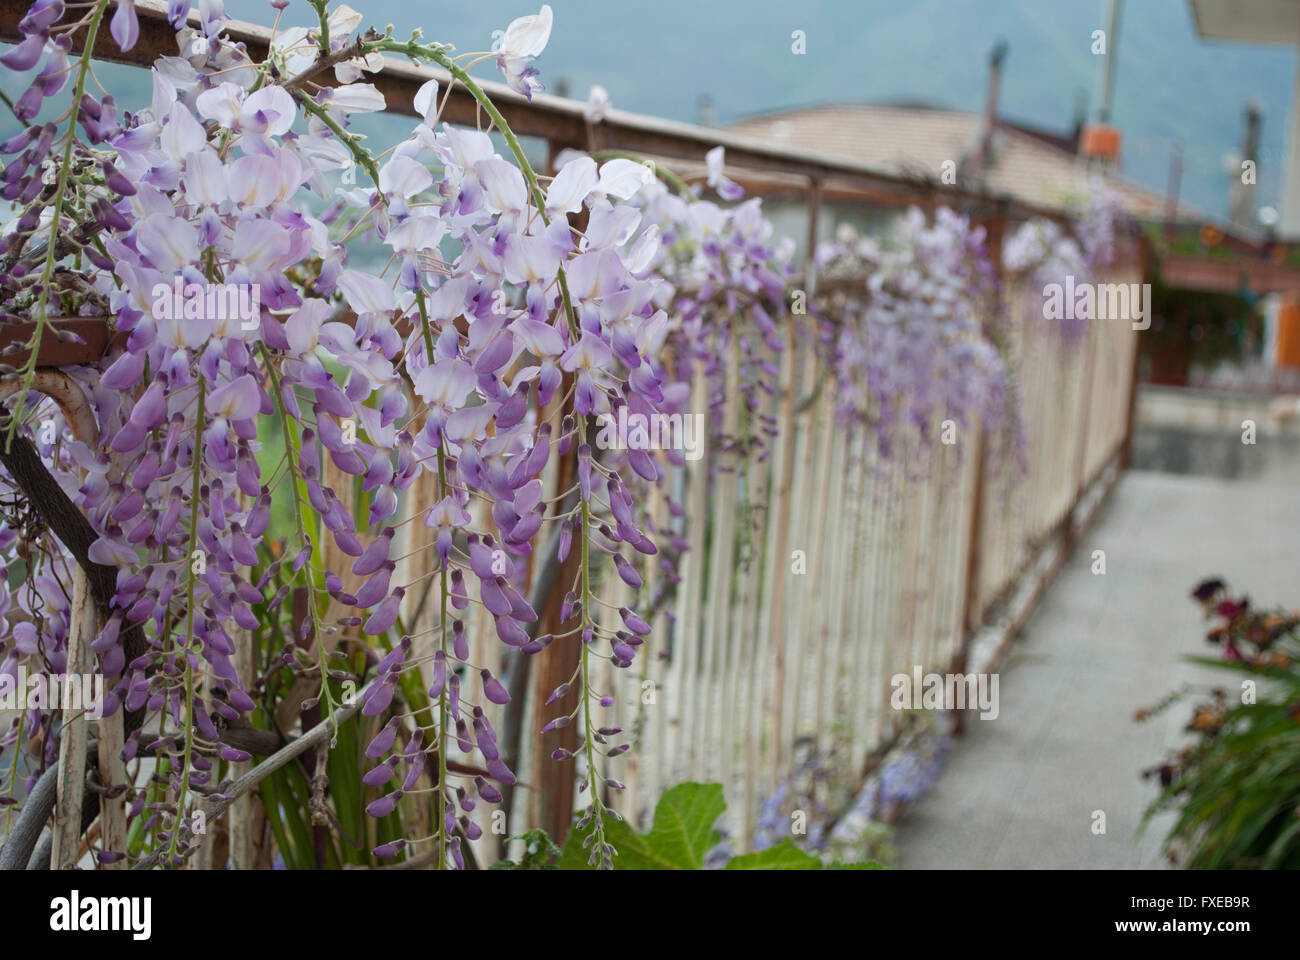 Wisteria Plant in an Old Courtyard With Other Flowers Stock Photo